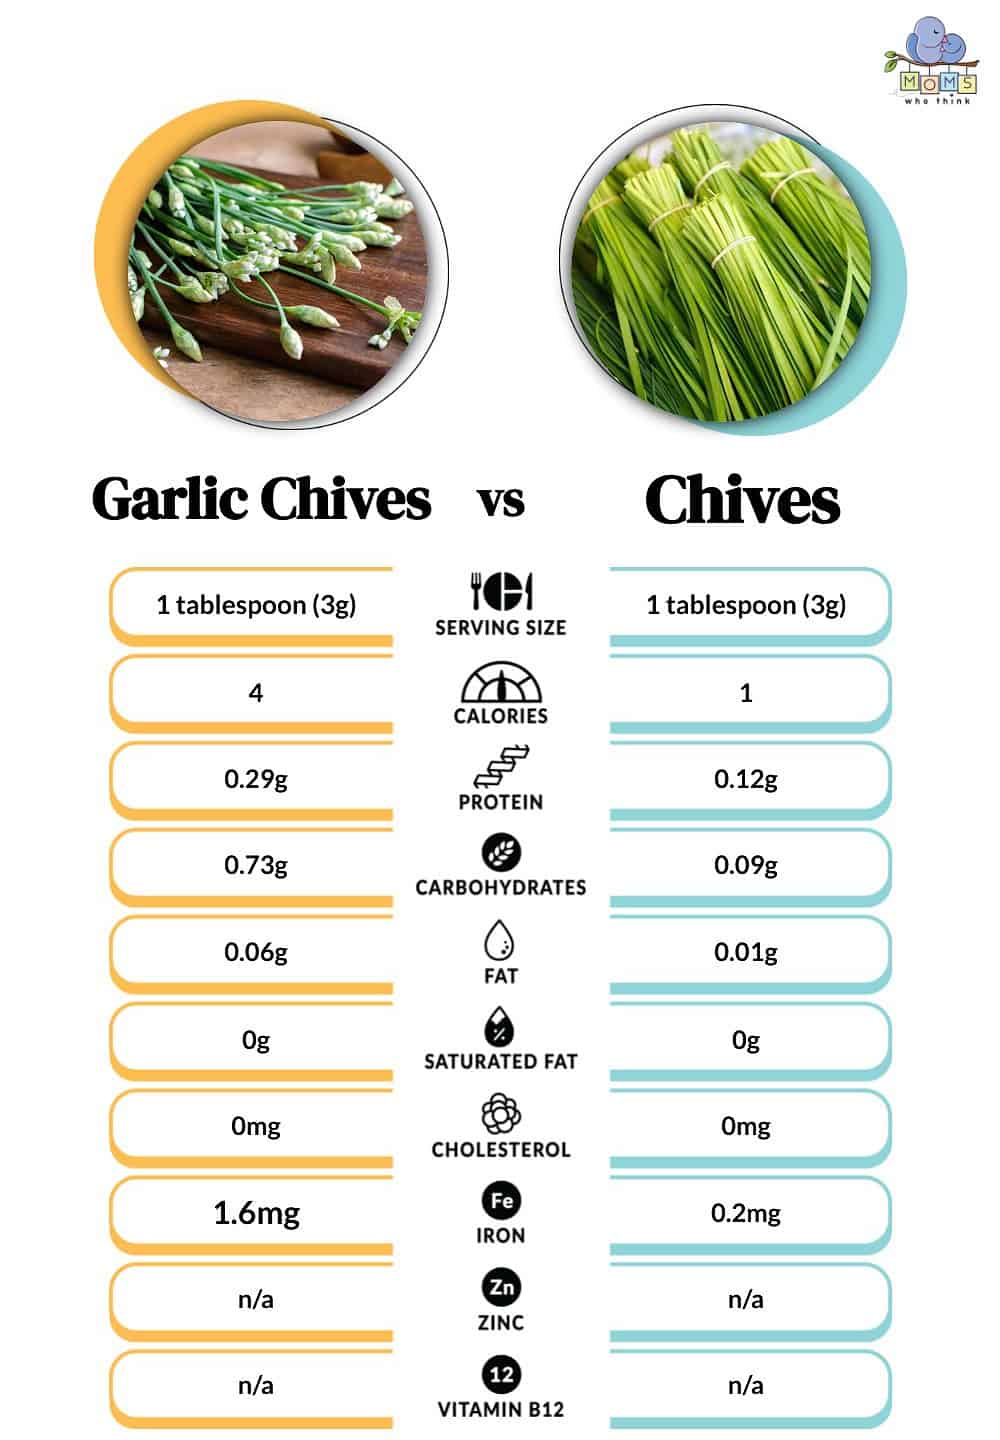 Garlic Chives vs Chives Nutritional Facts